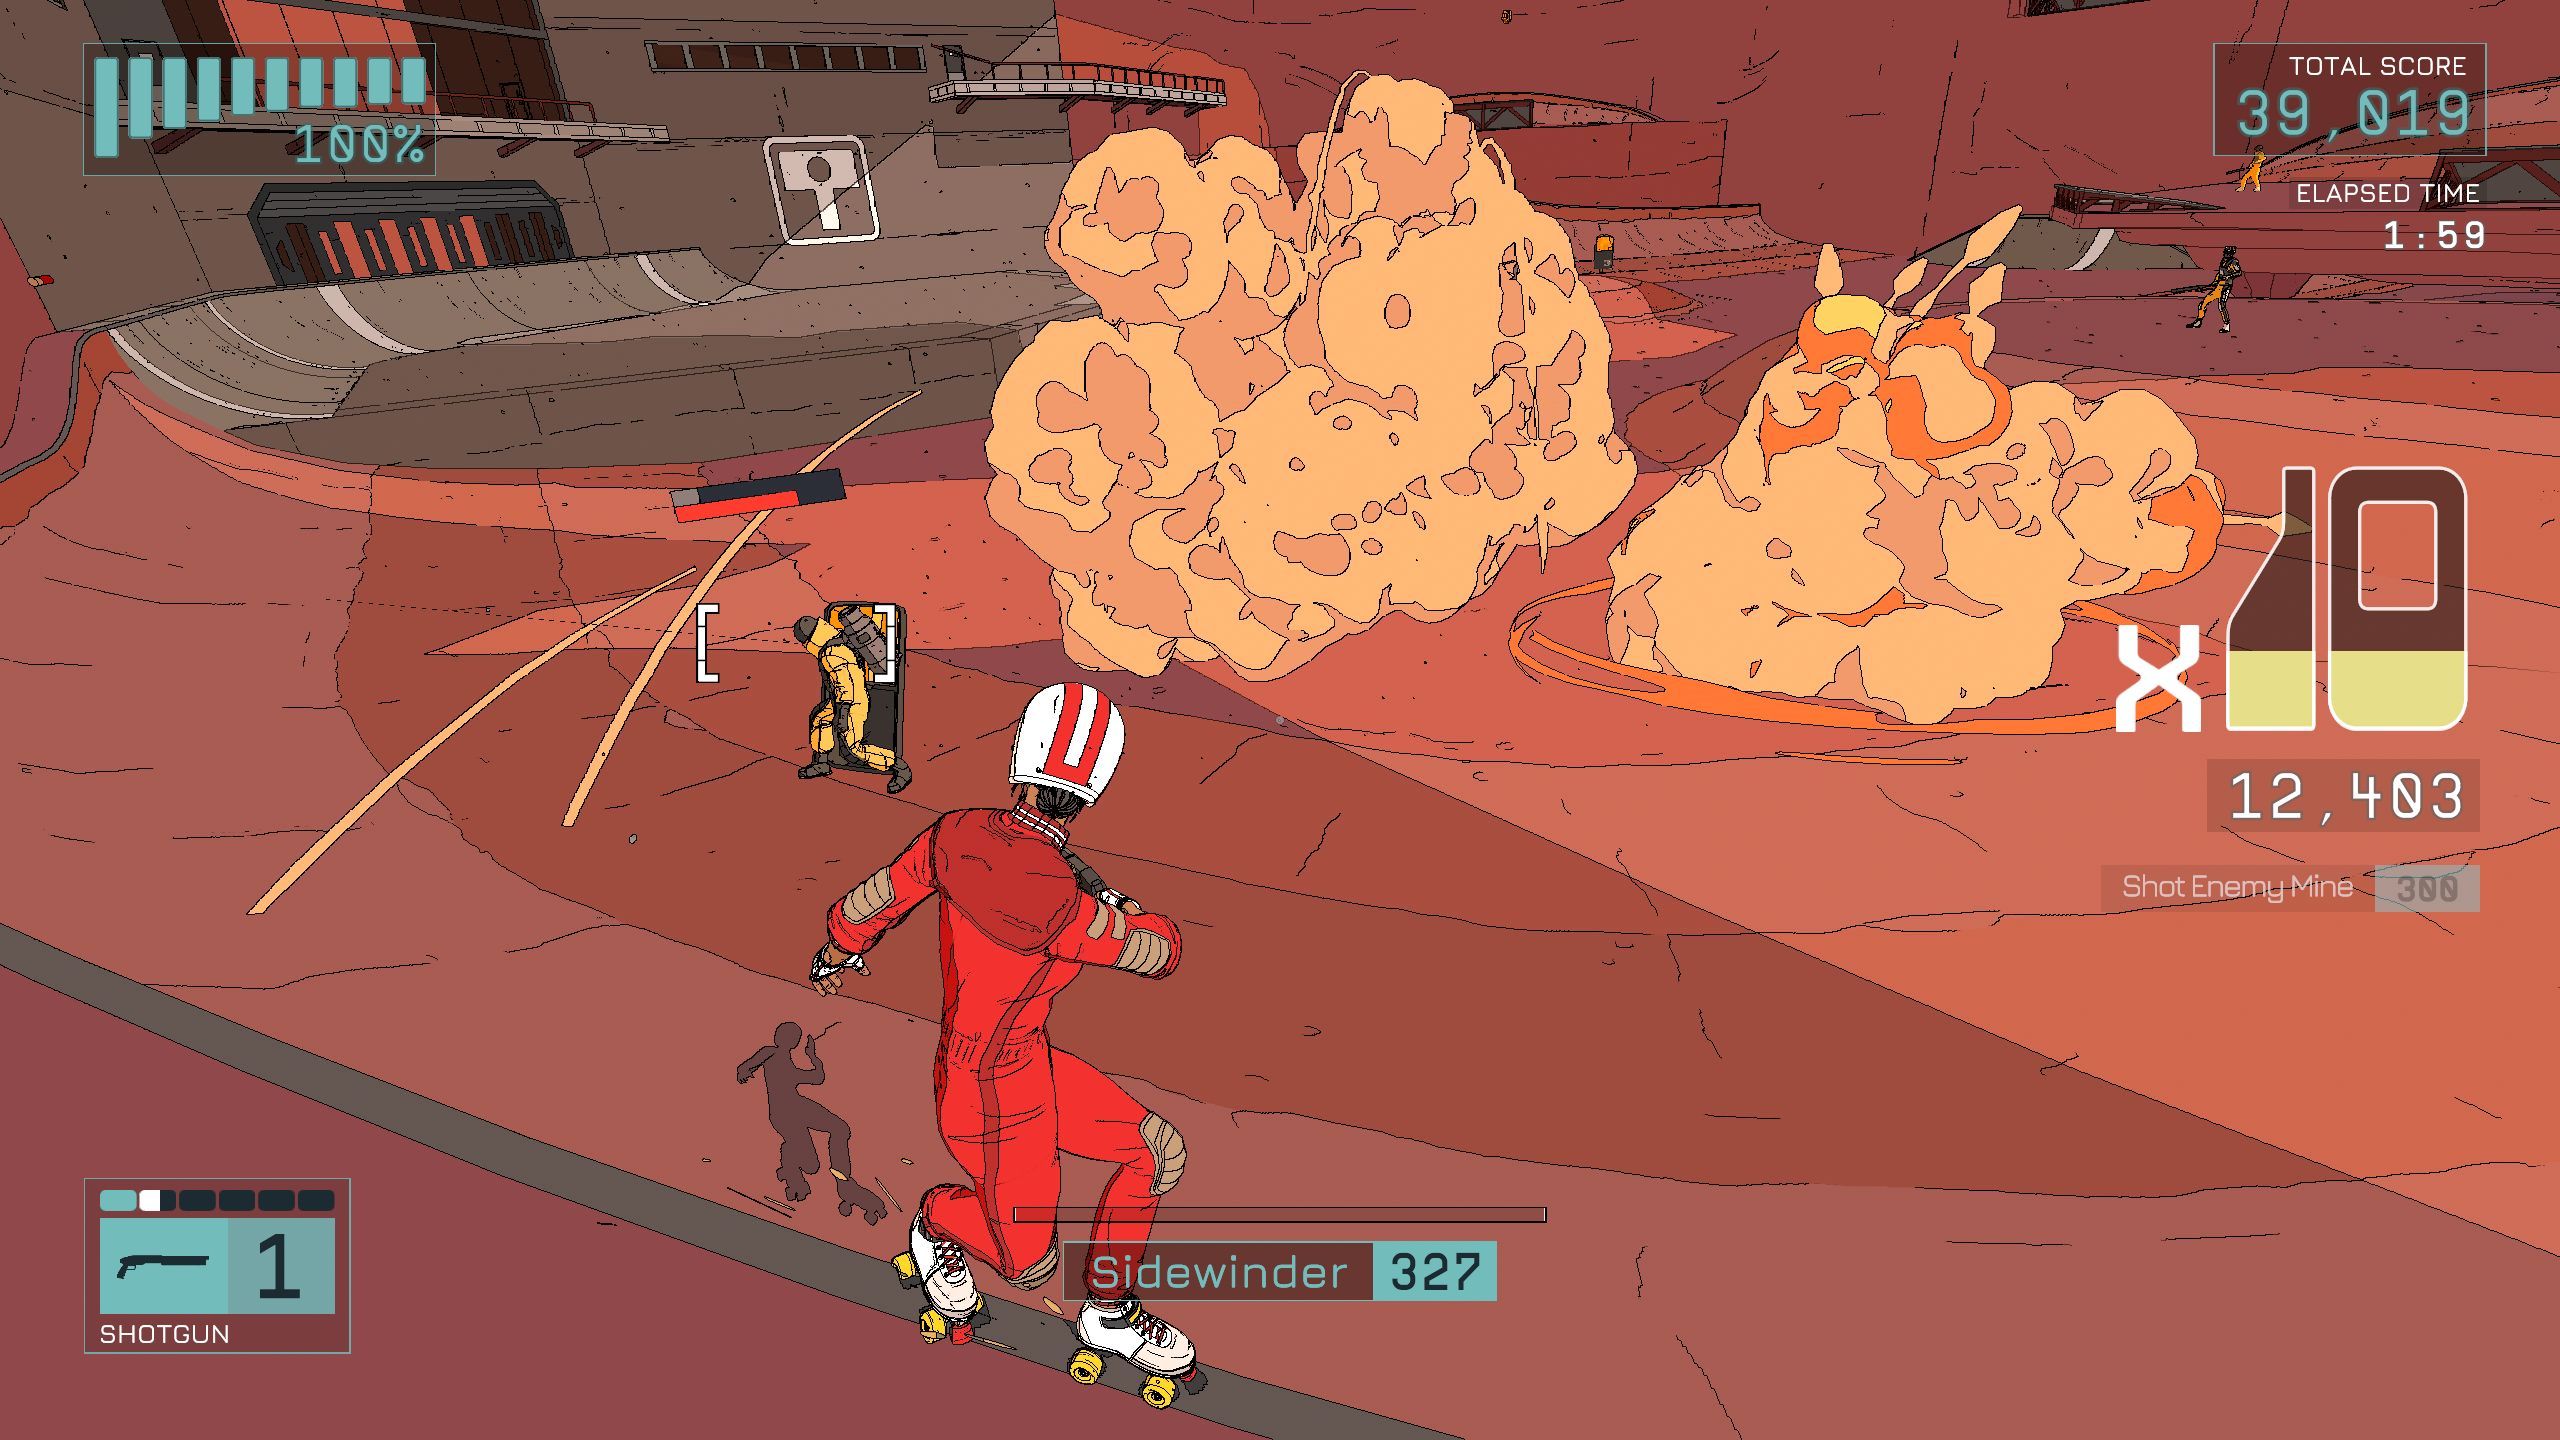 A woman in a red jump suit does a sidewinder while firing back at an enemy in a rollerdrome